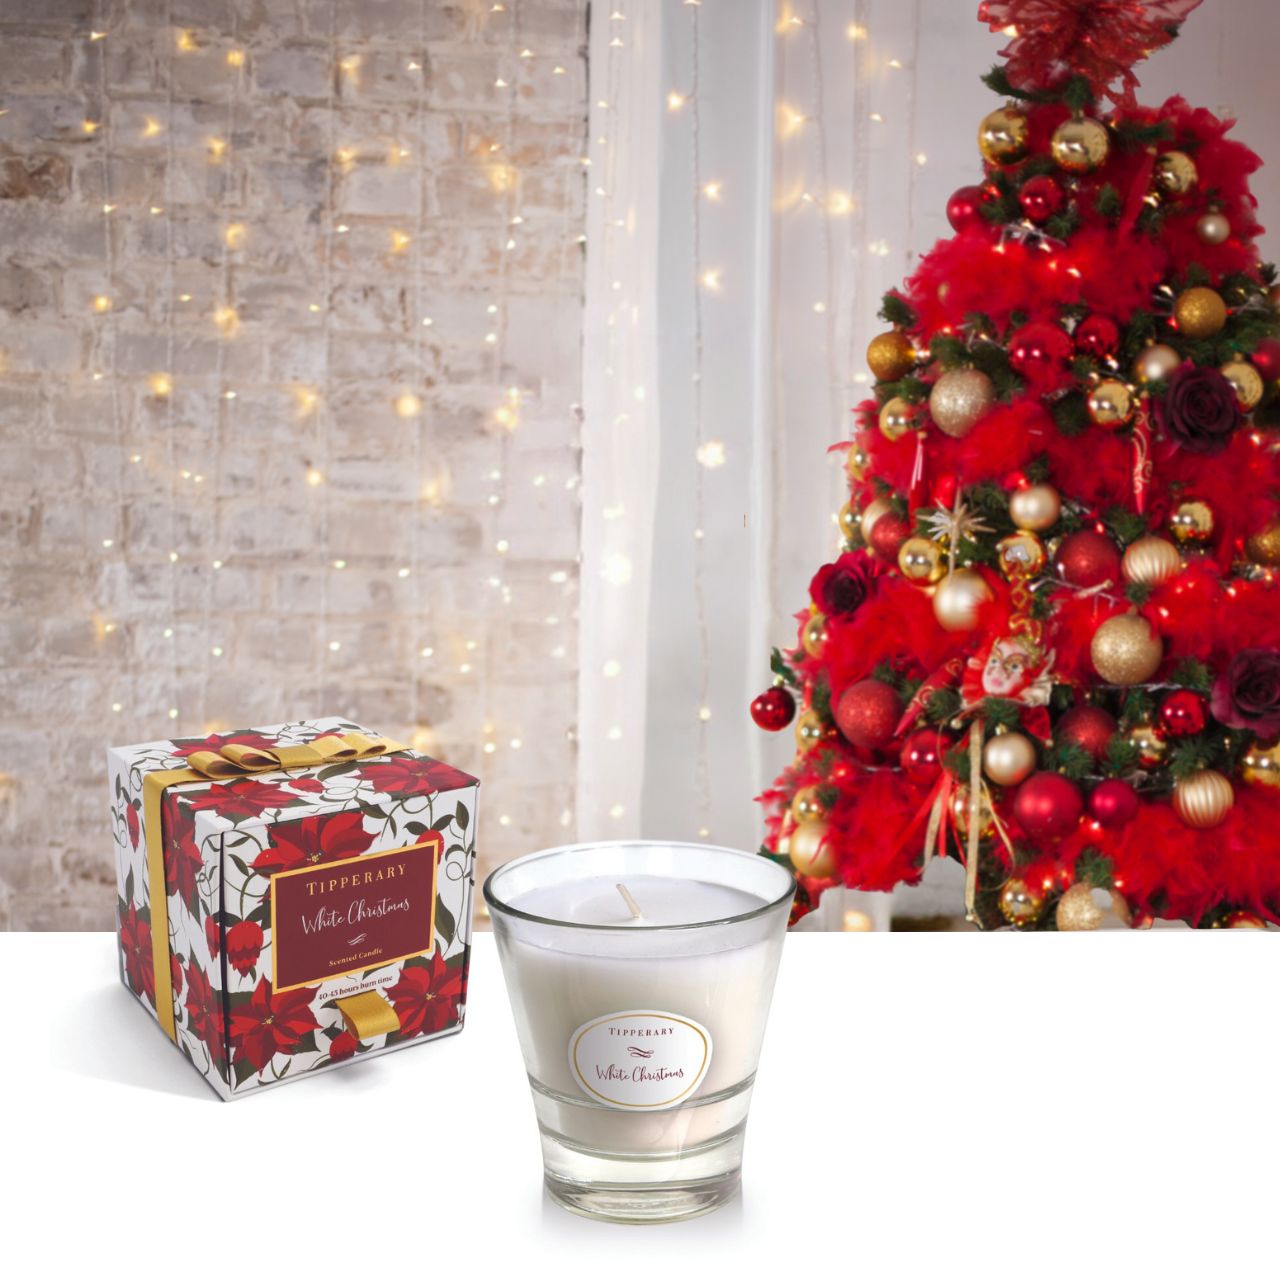 White Christmas Poinsettia Tumbler Candle by Tipperary  A classic Christmas fragrance with warm notes of orange spice amber and musk. Bringing festive cheer to your home.